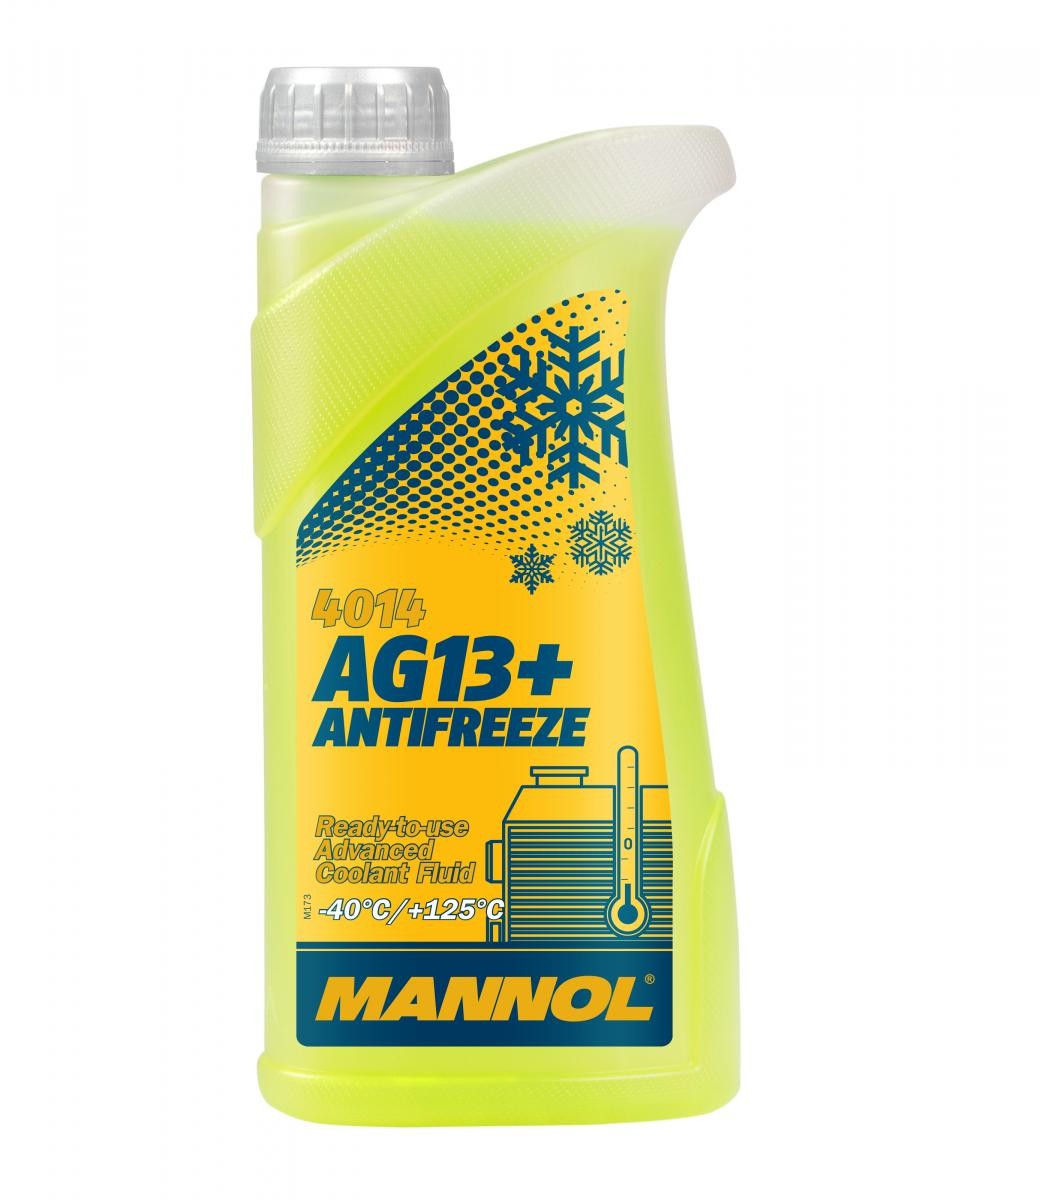 MANNOL MN4014-1 Antifreeze VW experience and price